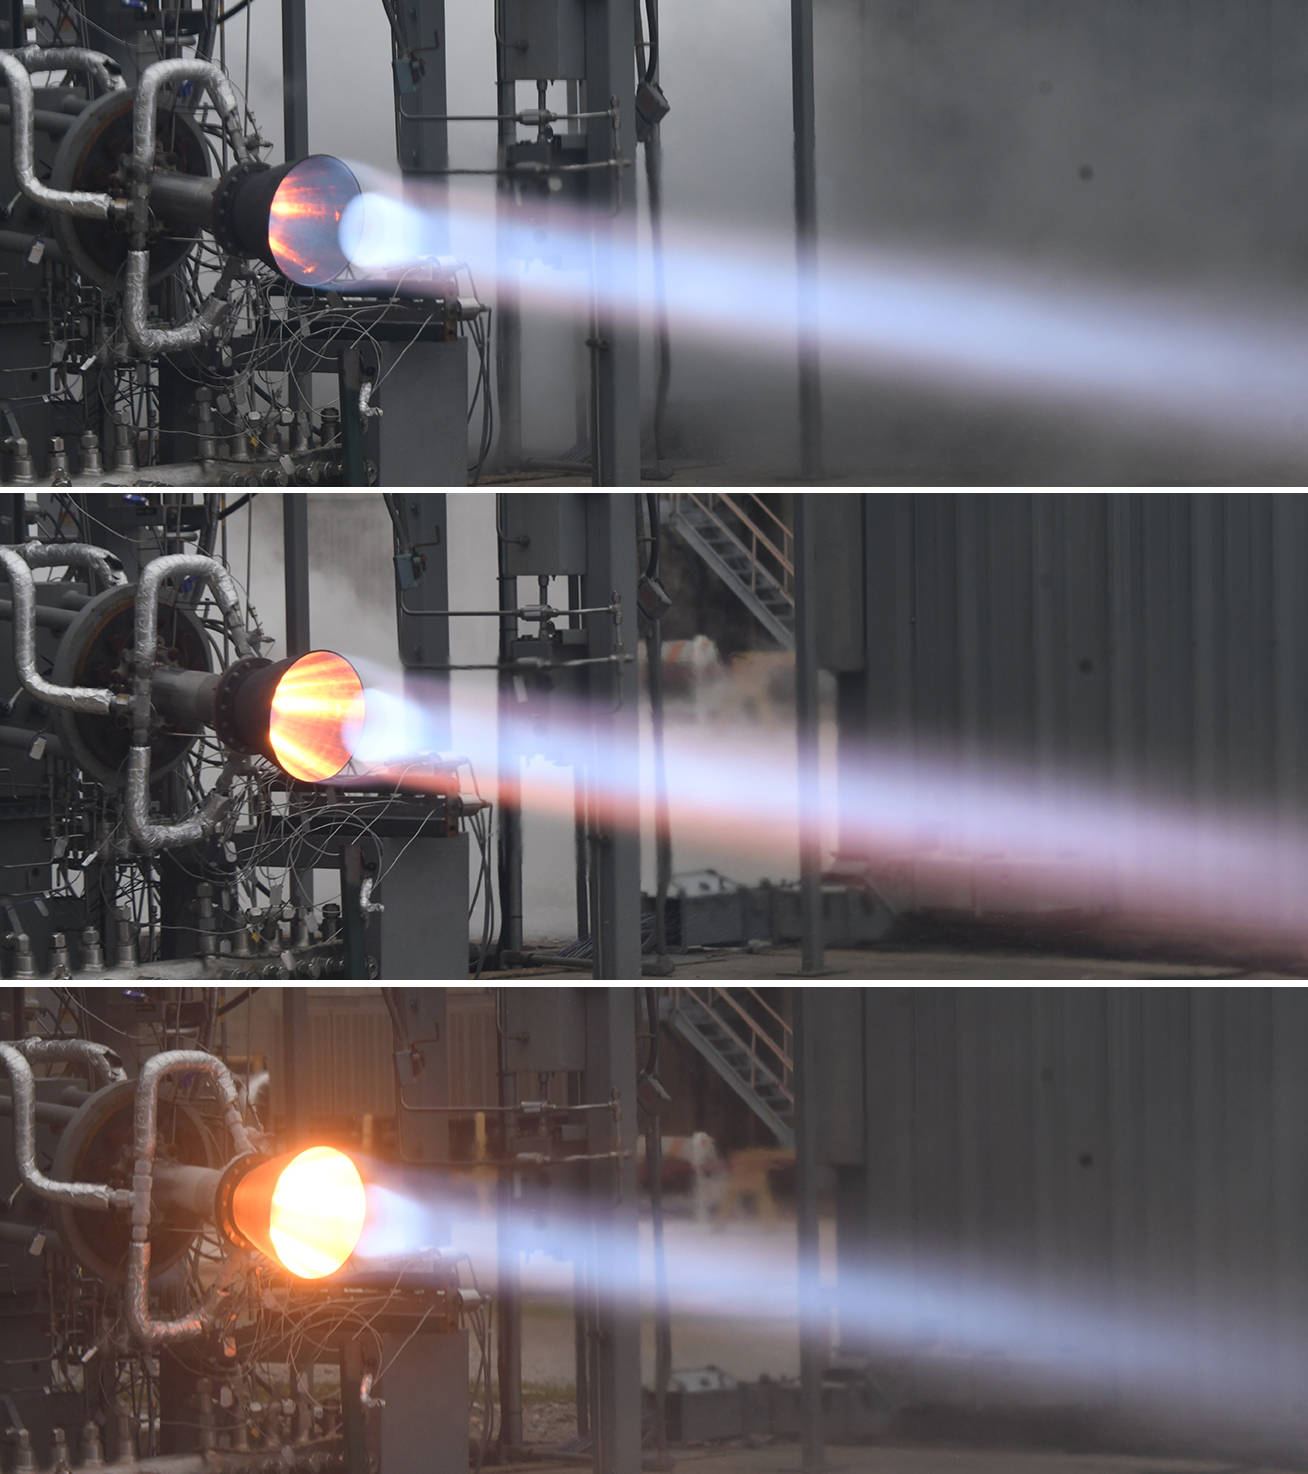 The Robotic Deposition Technology team completed the first phase of testing a 3D-printed metal thrust chamber assembly at NASA's Marshall Space Flight Center in Huntsville, Alabama. 